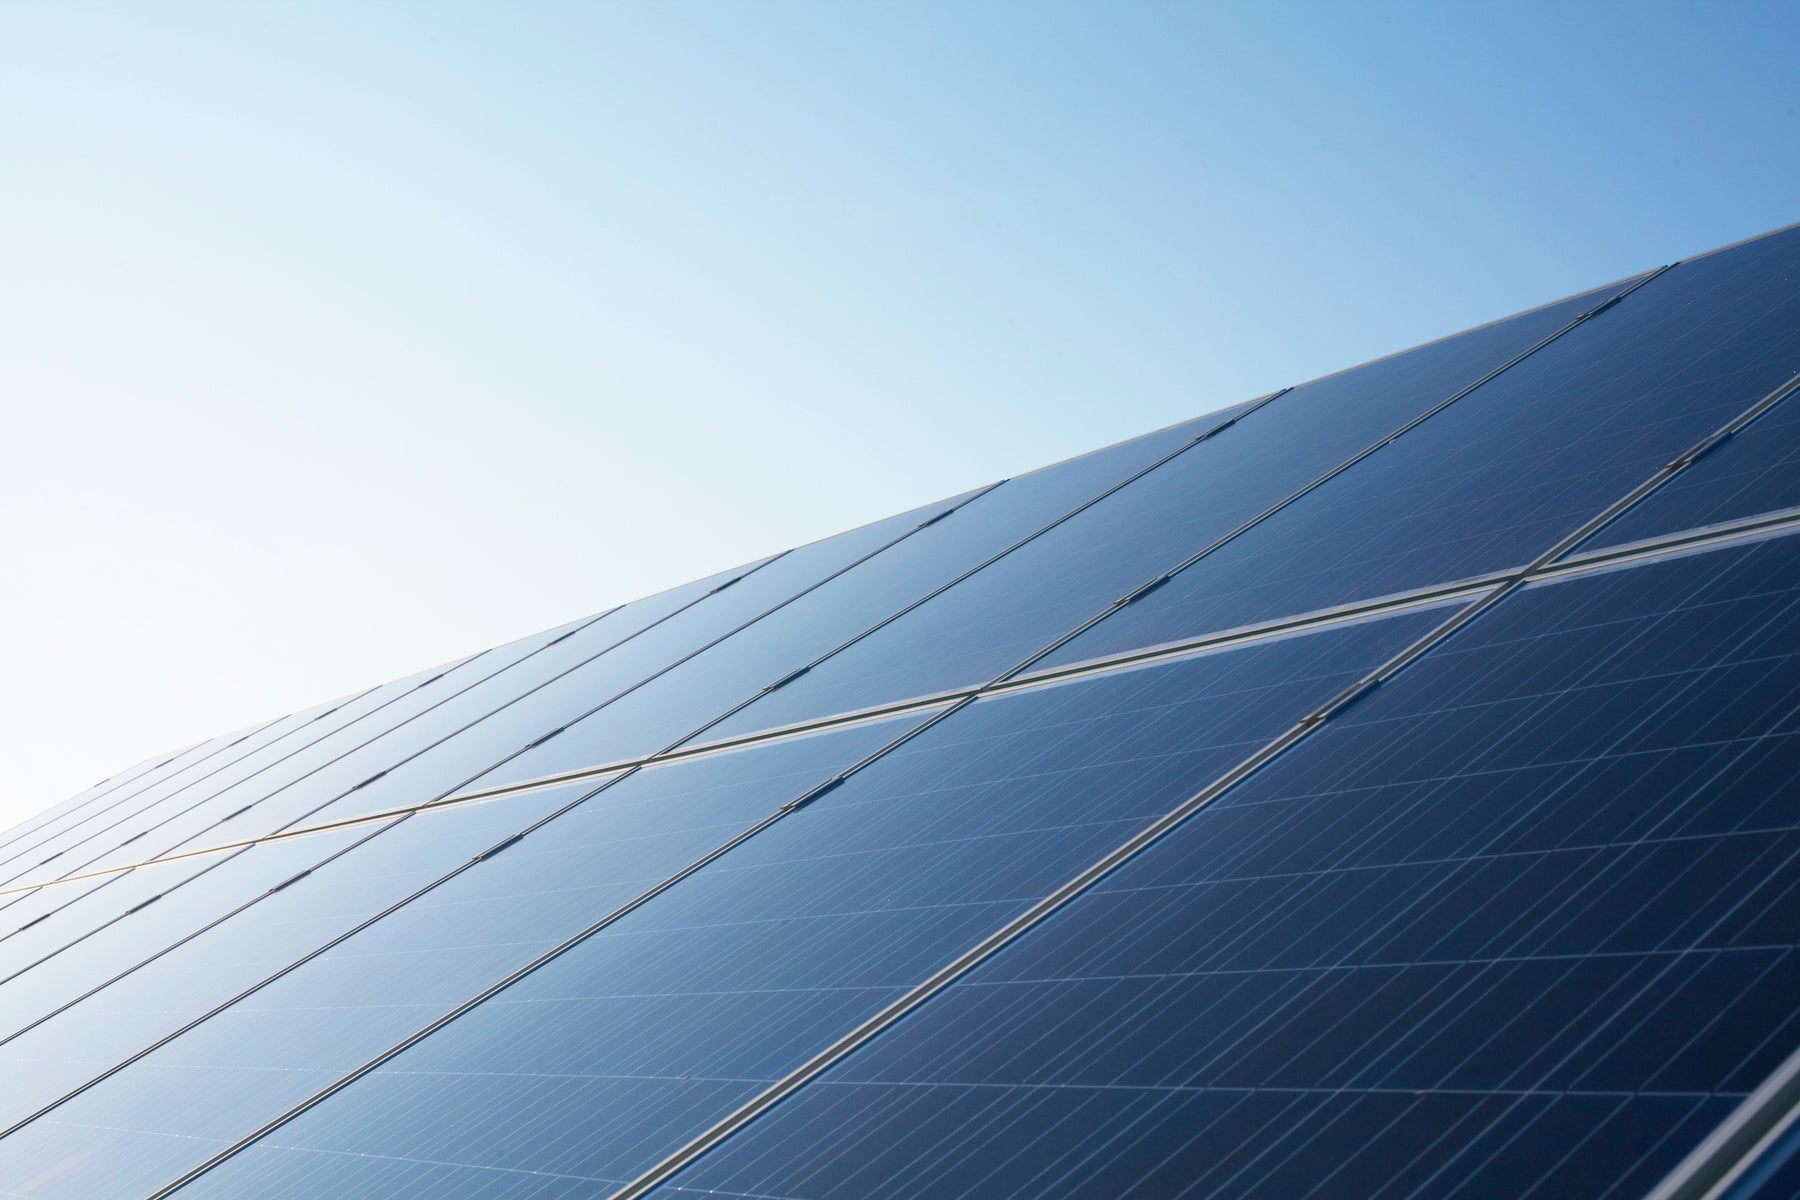 The Ultimate Guide to Choosing the Right Solar Panels for Your Home